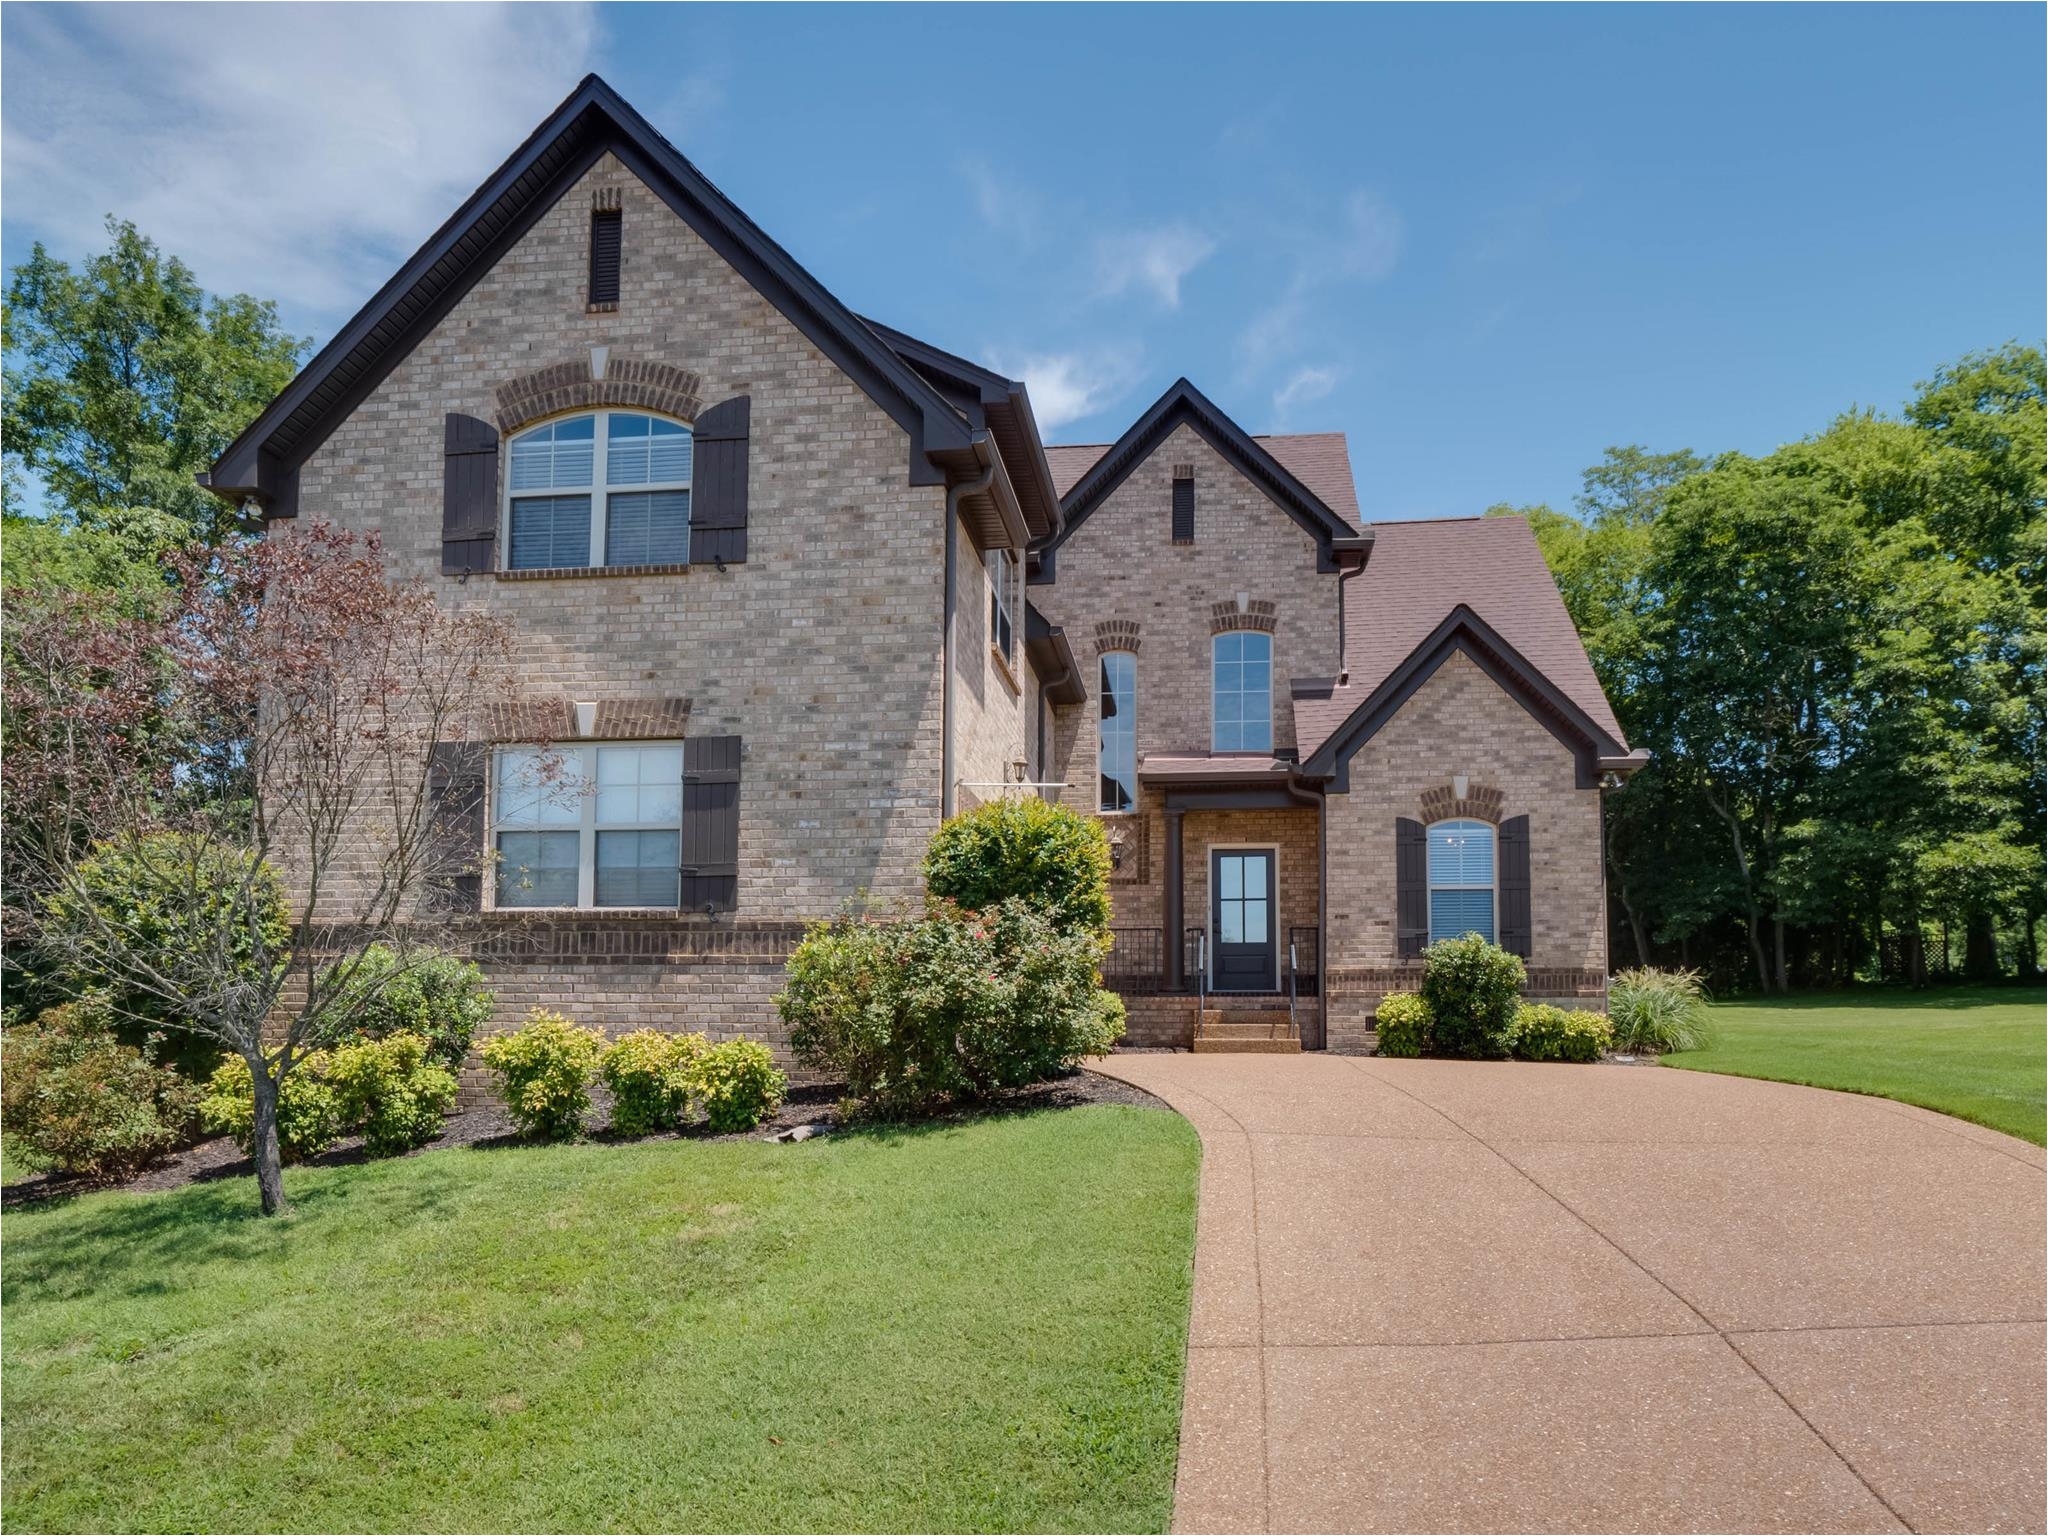 sold home for sale in 144 ruland cir hendersonville tn